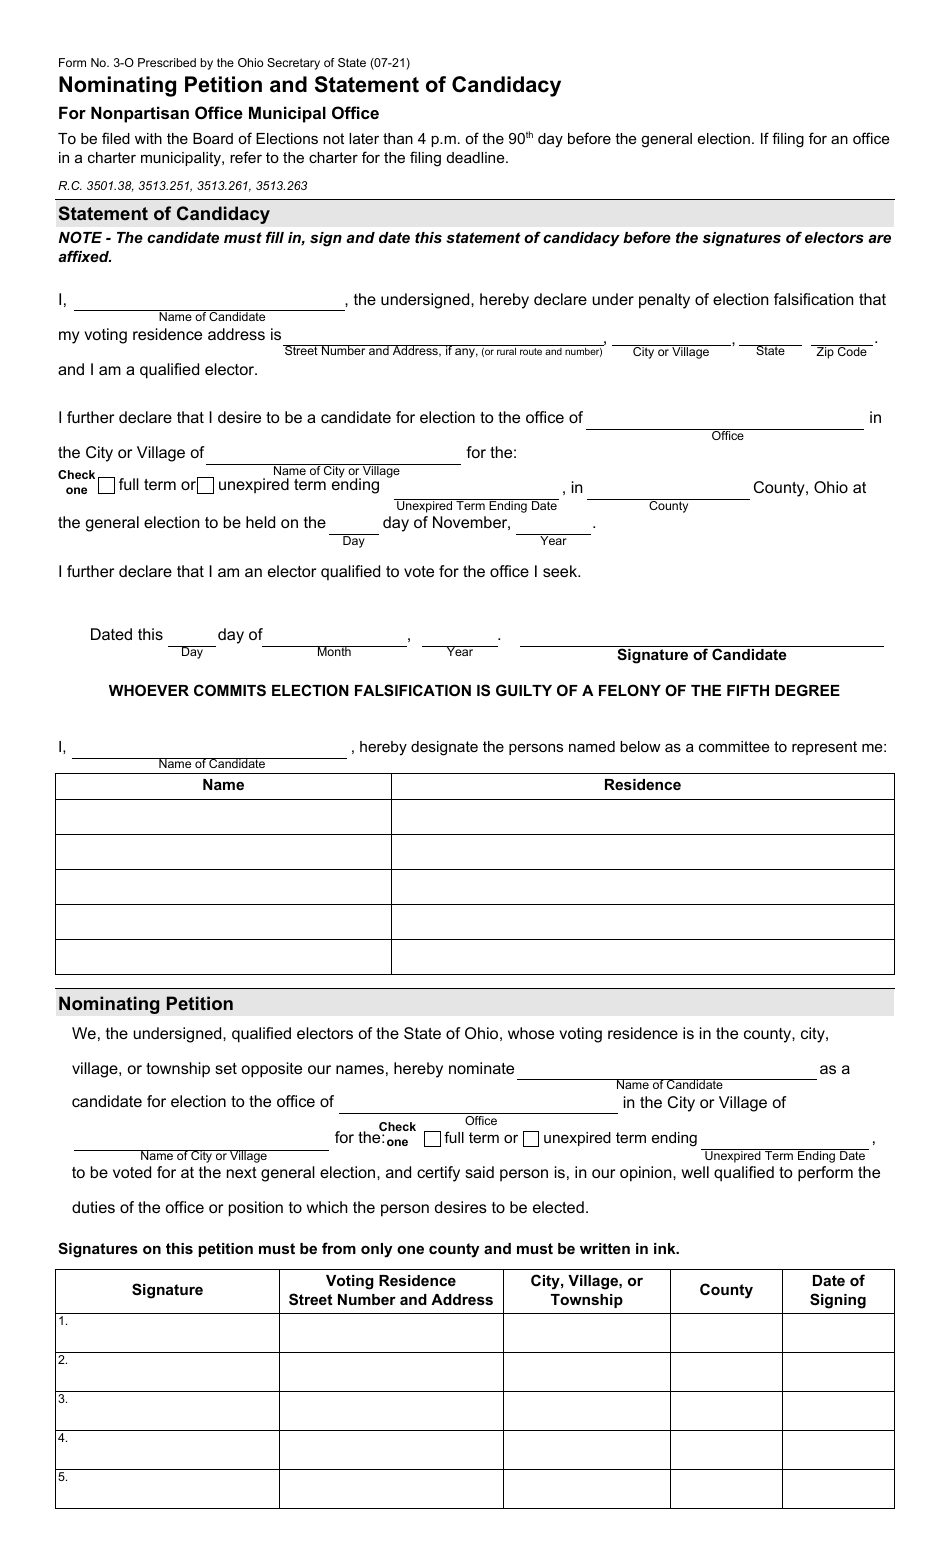 Form 3-O Nominating Petition and Statement of Candidacy for Nonpartisan Office Municipal Office - Ohio, Page 1